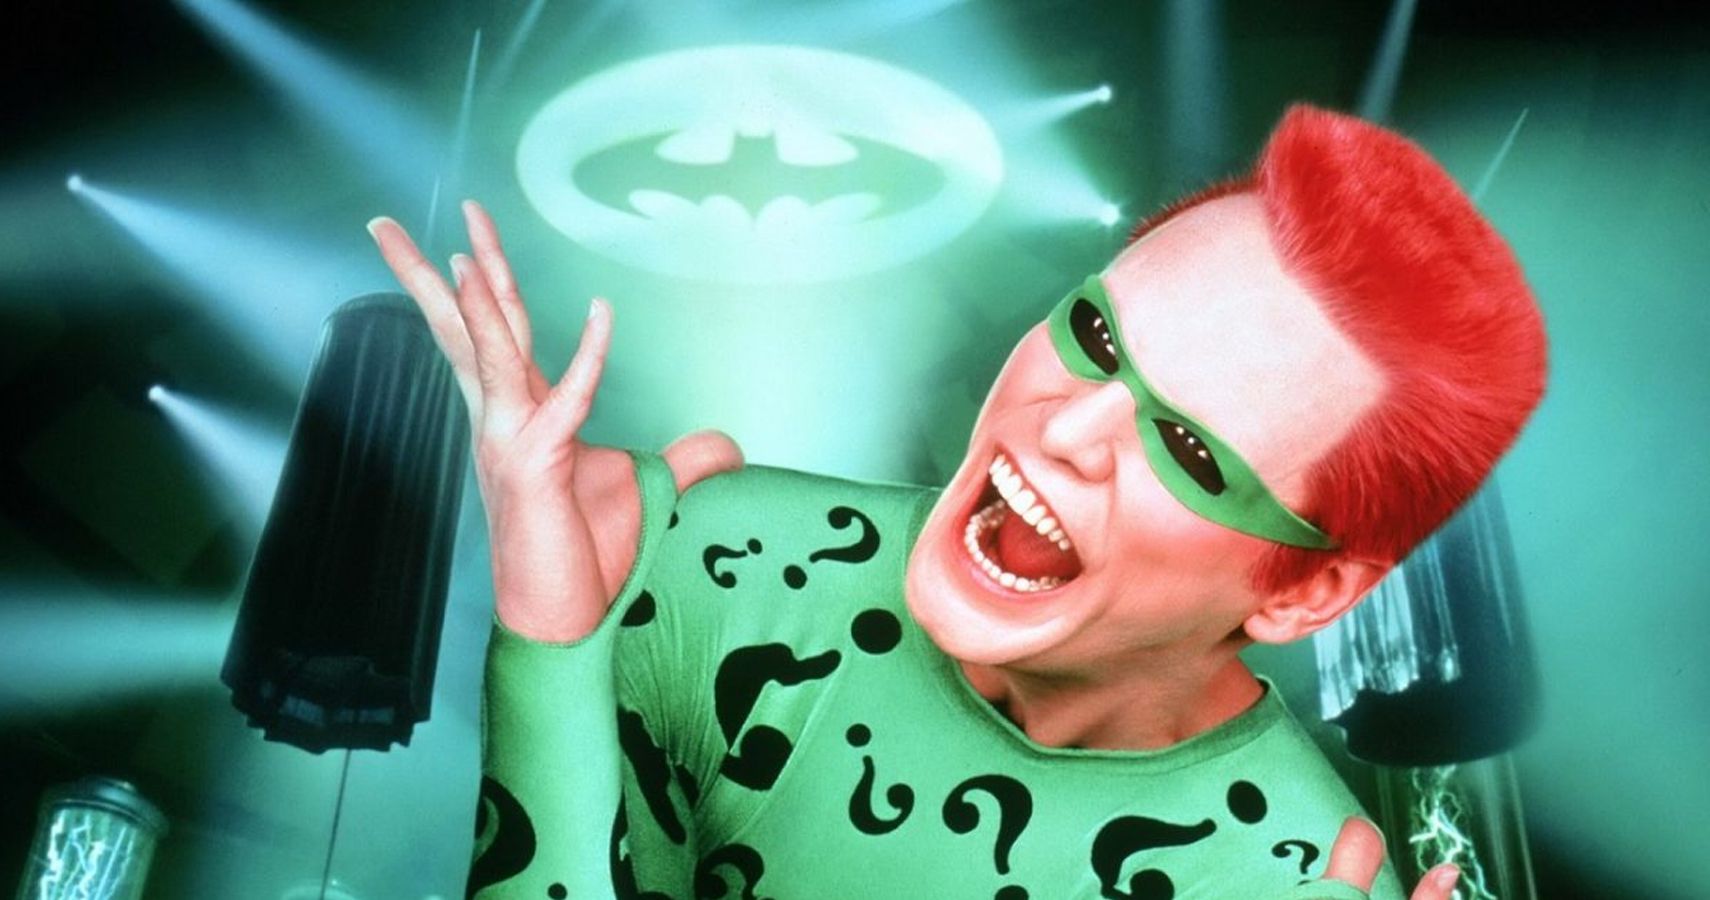 25 DC Supervillains Who Are Total Weak Sauce (But Casual Fans Think Are Strong)